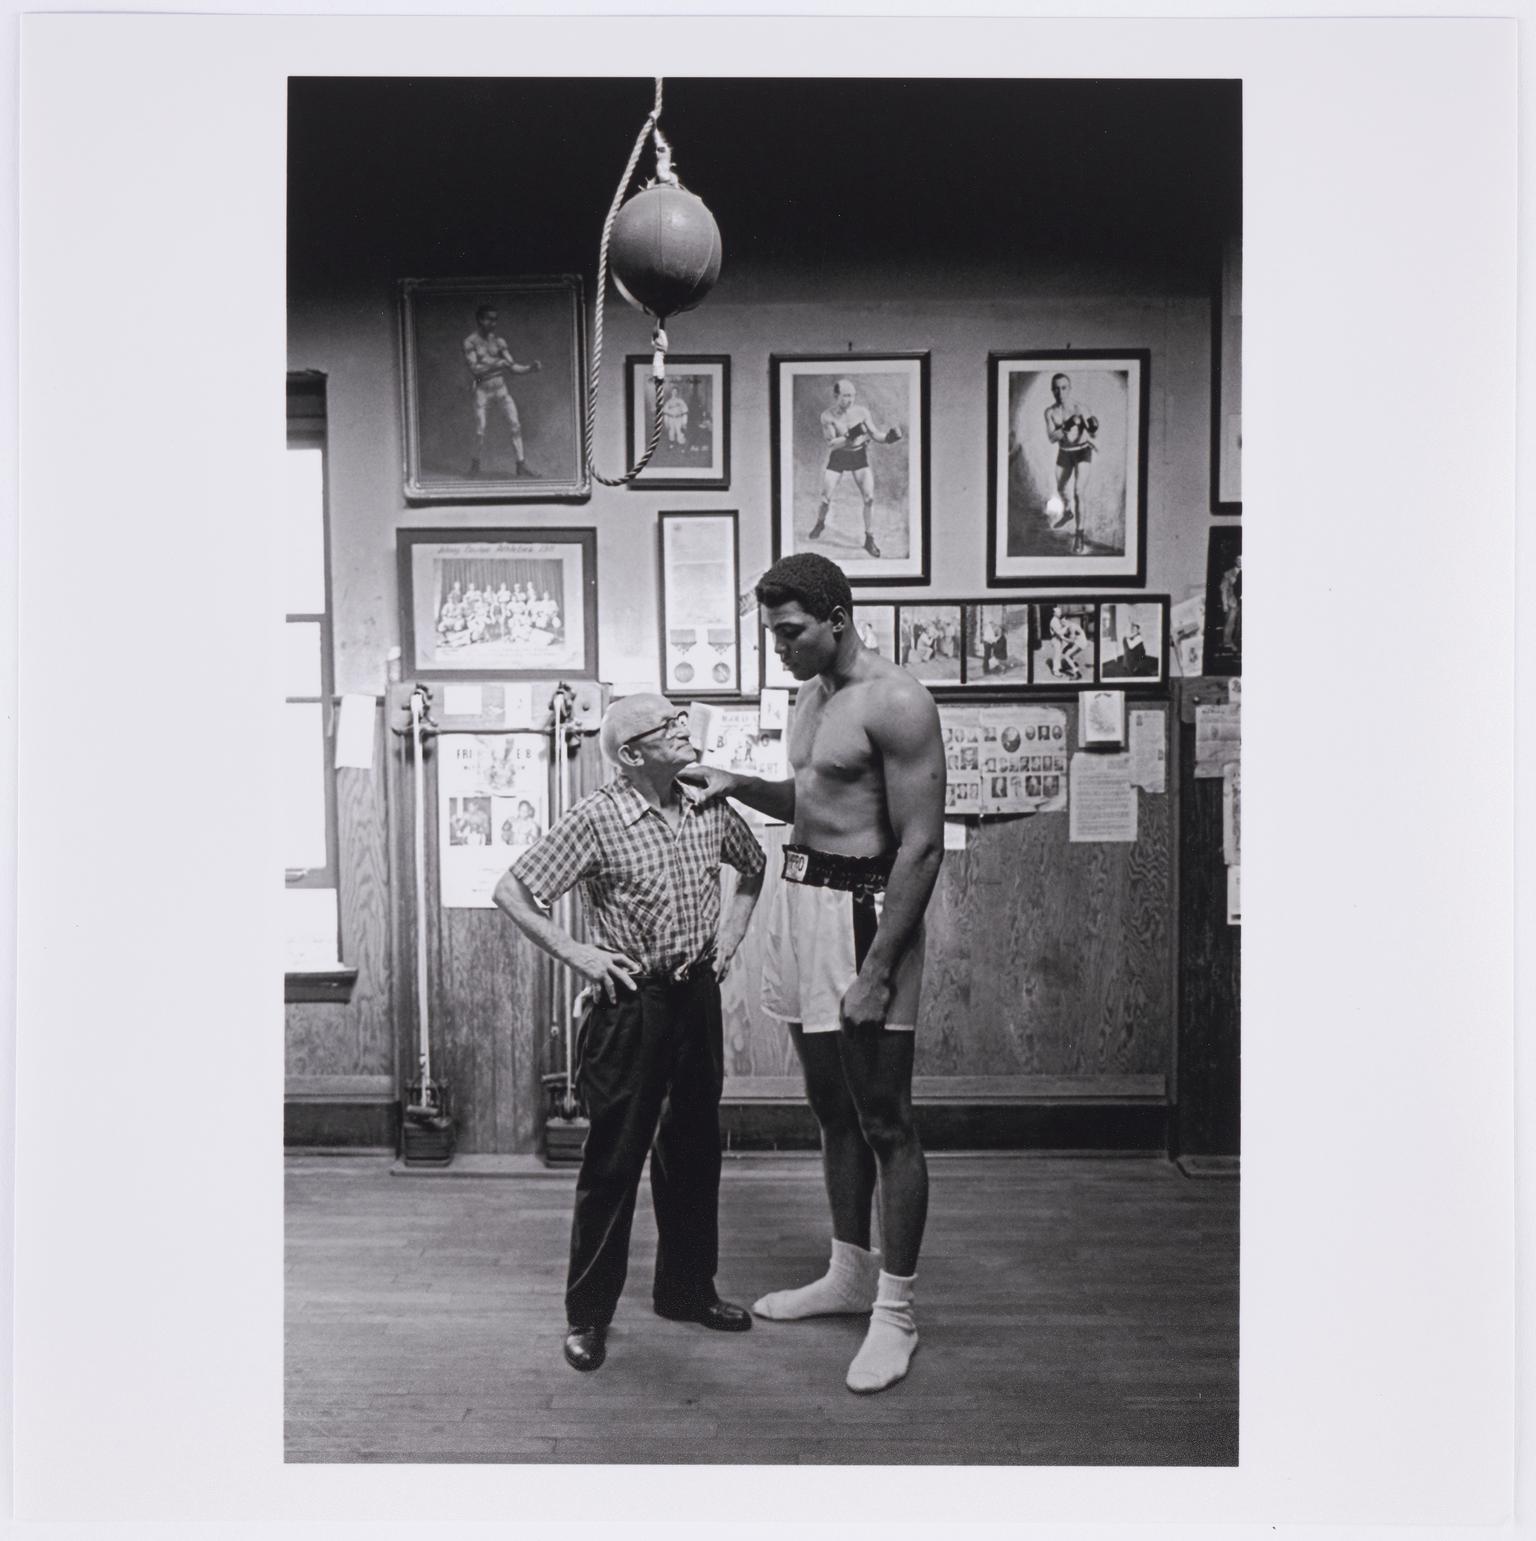 Muhammad Ali, boxing world heavy weight champion with Johnny Coulon, the world bantam weight champion of 1910, in his Chicago gym